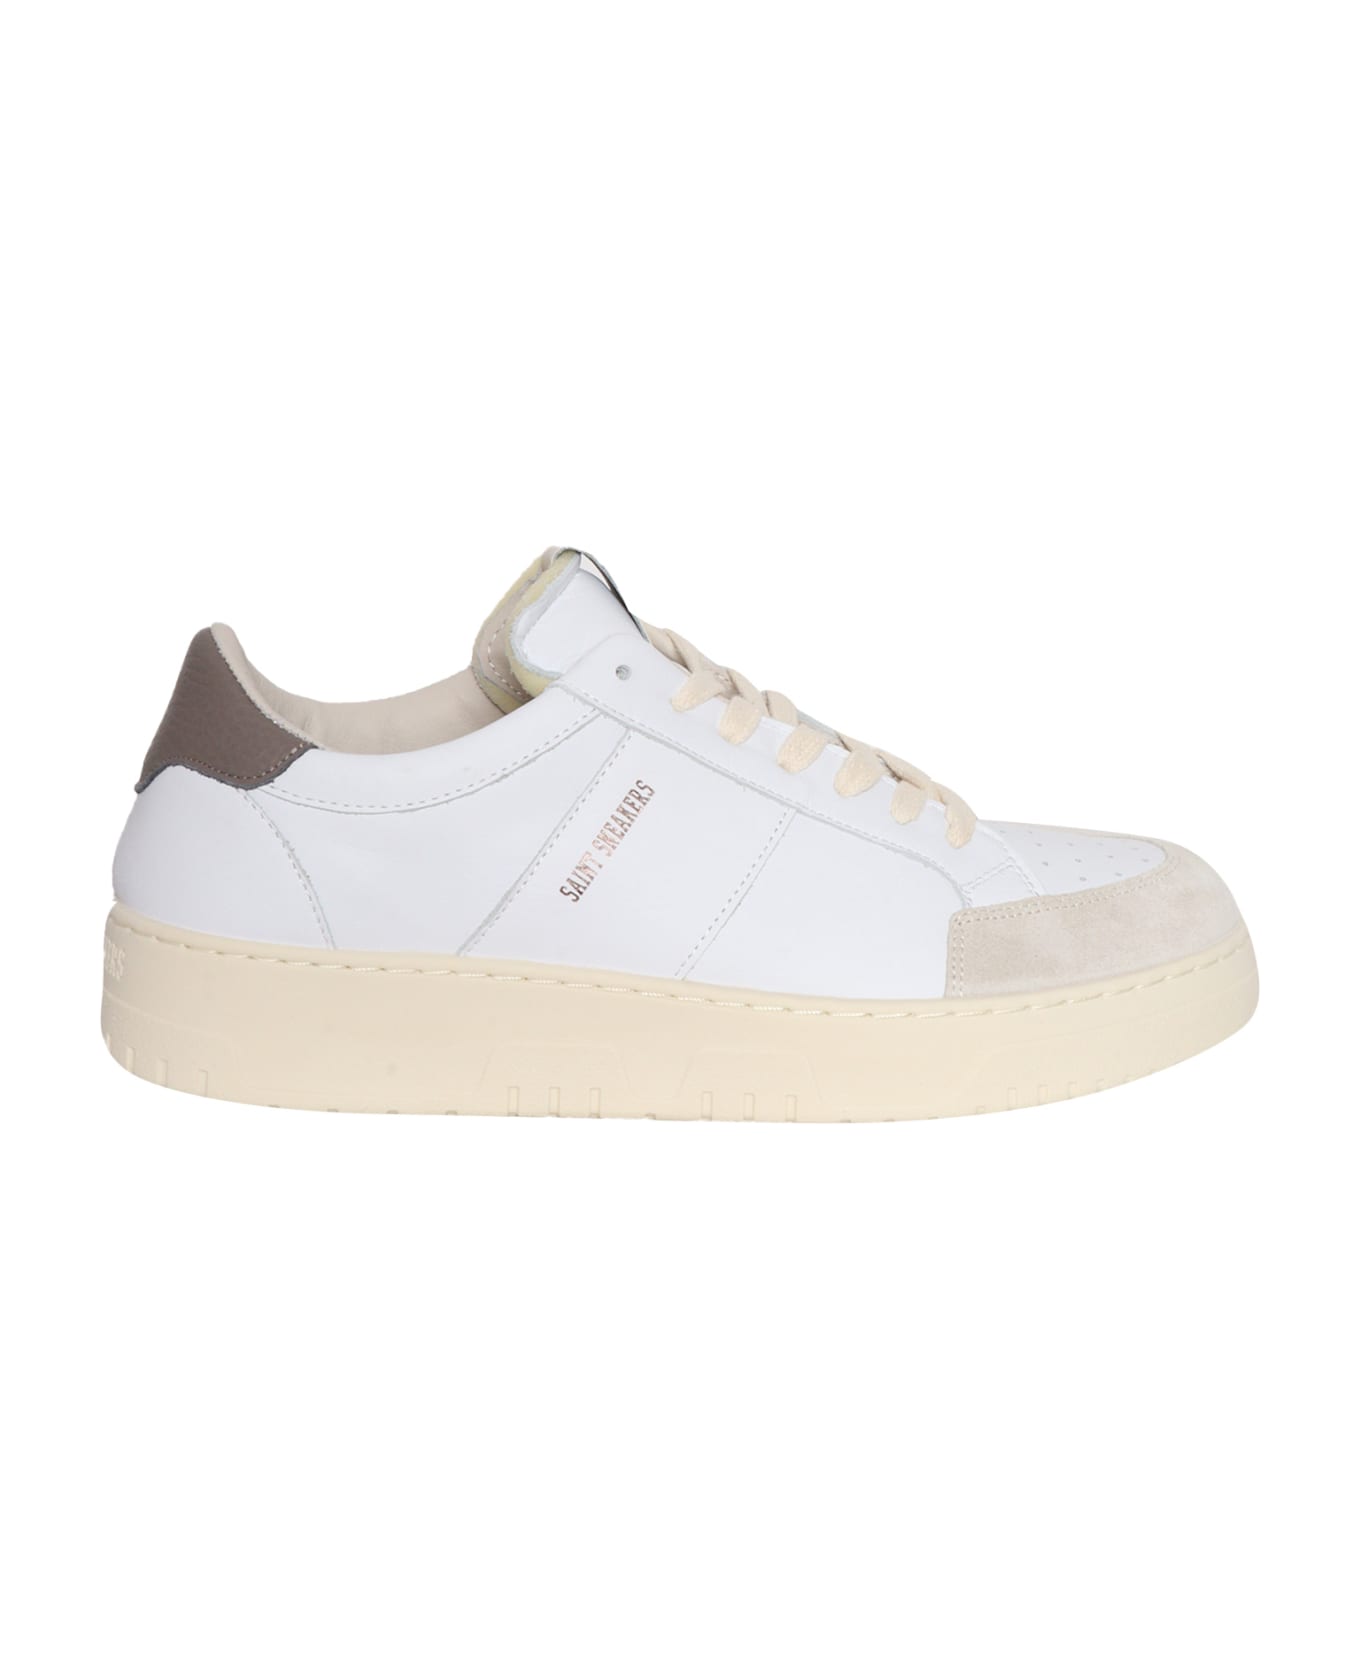 Saint Sneakers Sail Leather Sneakers - WHITE スニーカー